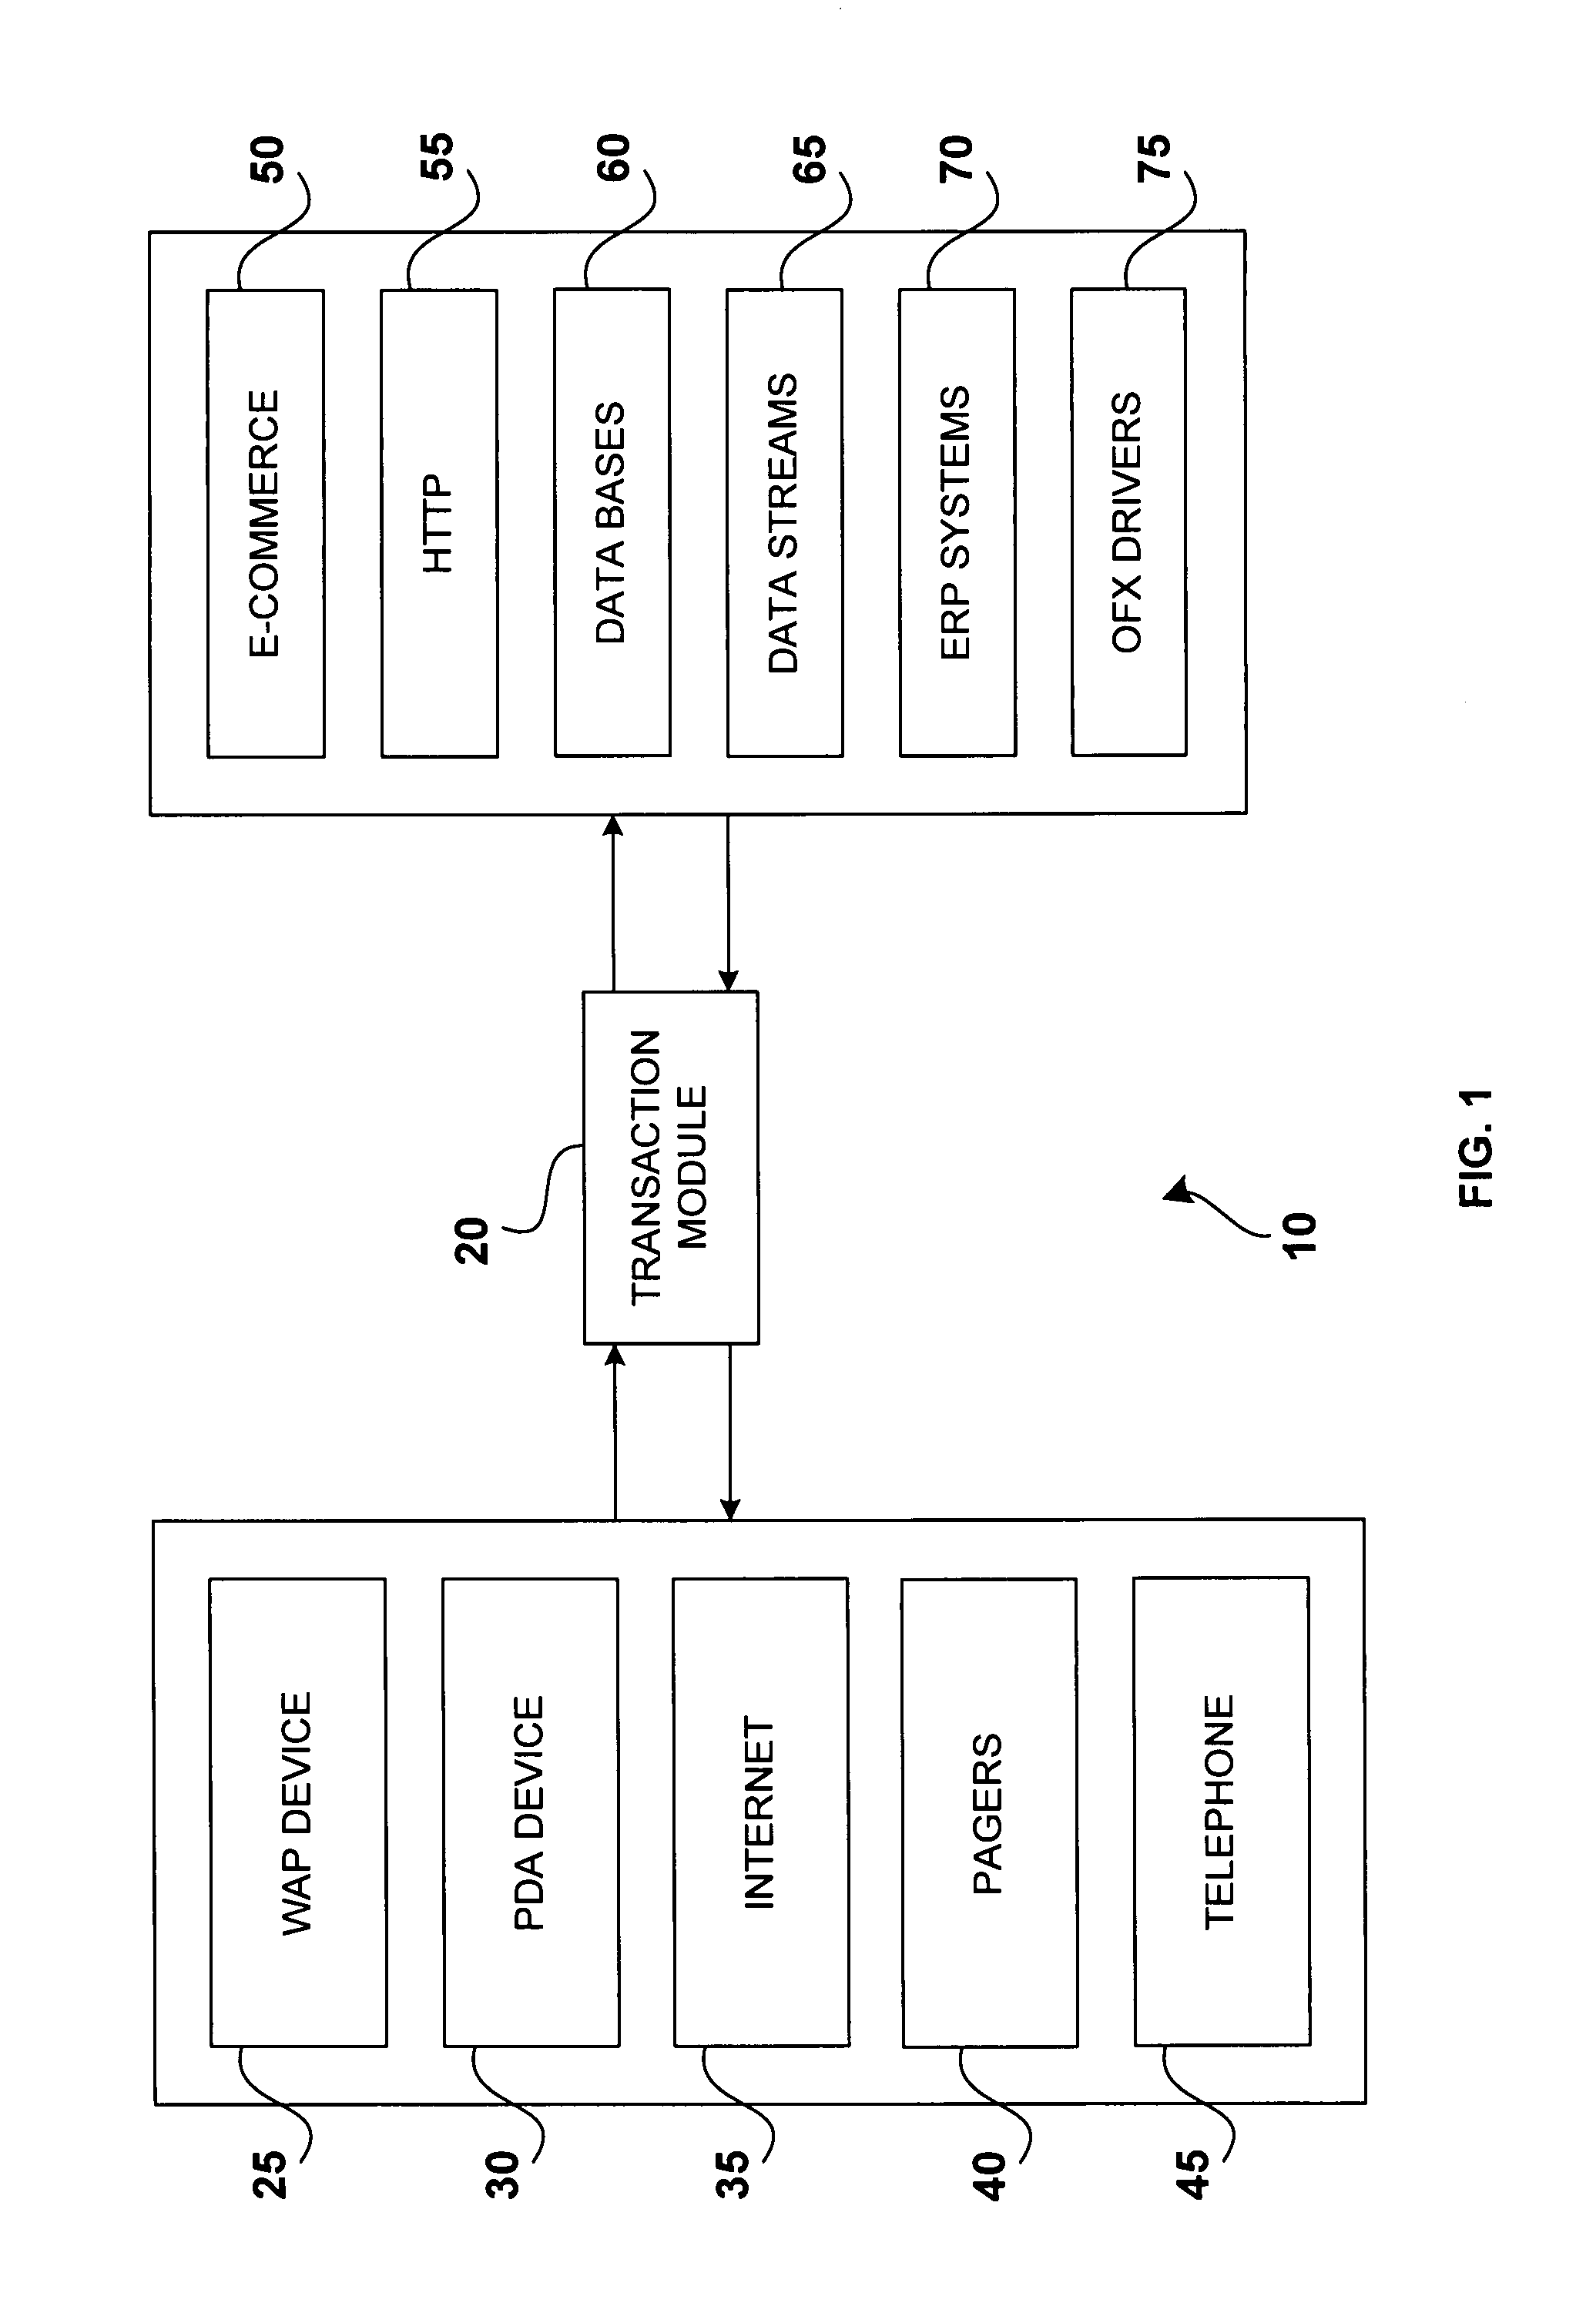 System and method for obtaining feedback from delivery of informational and transactional data